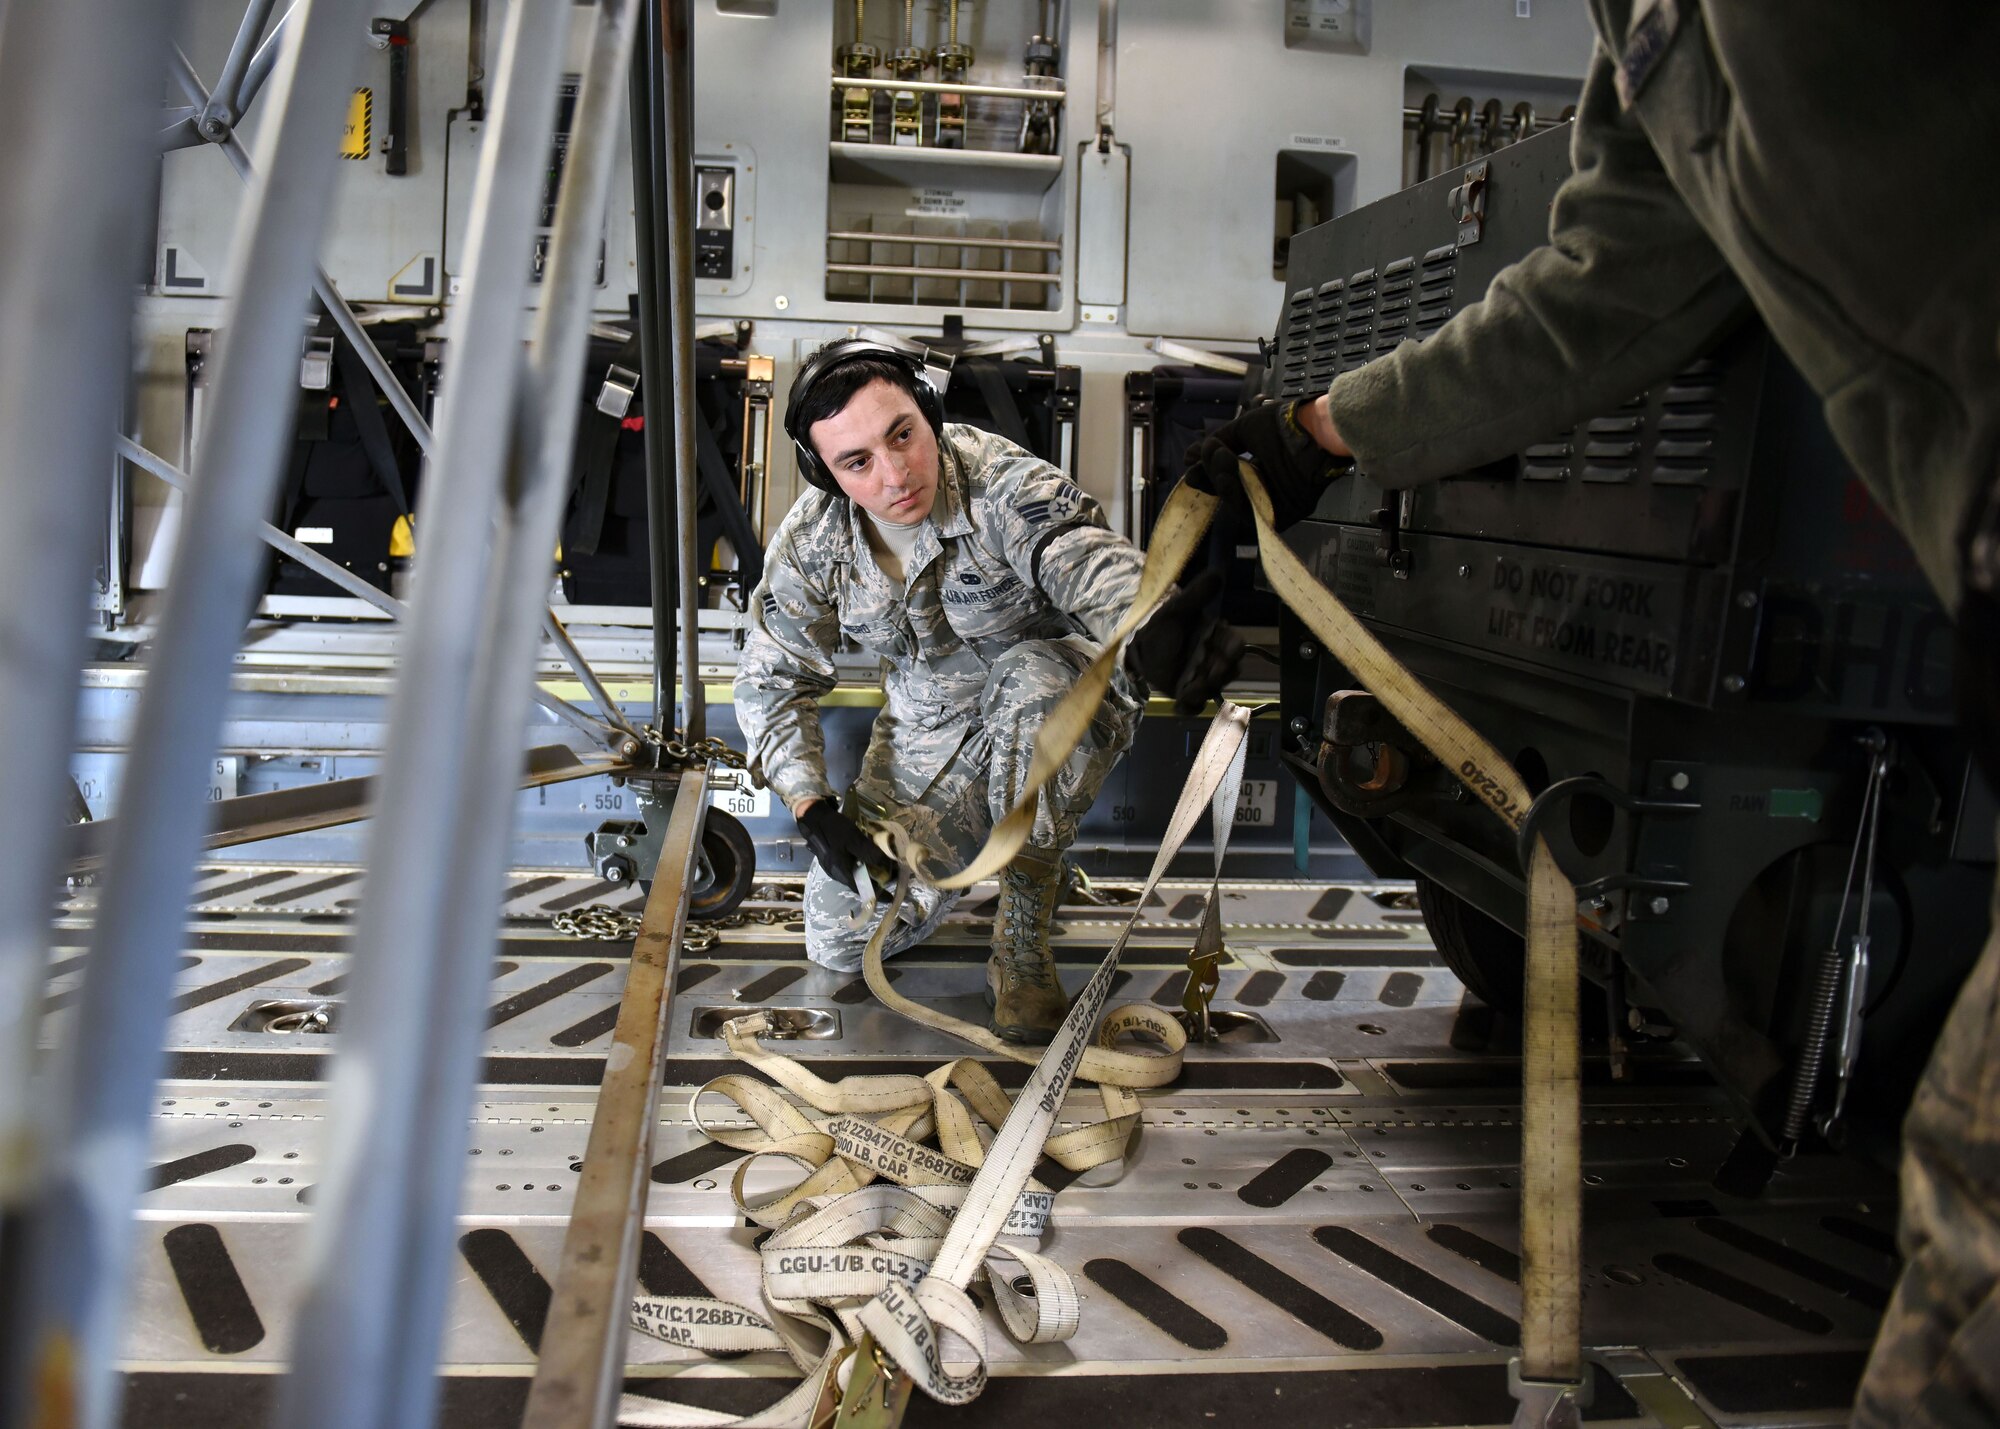 Senior Airman Daniel Romero, 62nd Aerial Port Squadron air transportation, secures cargo in preparation for airlift during a mobility exercise, Dec. 1, 2017 on the McChord Field flightline at Joint Base Lewis-McChord, Wash. The exercise was intended to hone the ability of 62nd Airlift Wing and 627th Air Base Group Airmen to deploy forces and cargo anywhere, anytime utilizing global airlift. (U.S. Air Force photo by Staff Sgt. Whitney Taylor)